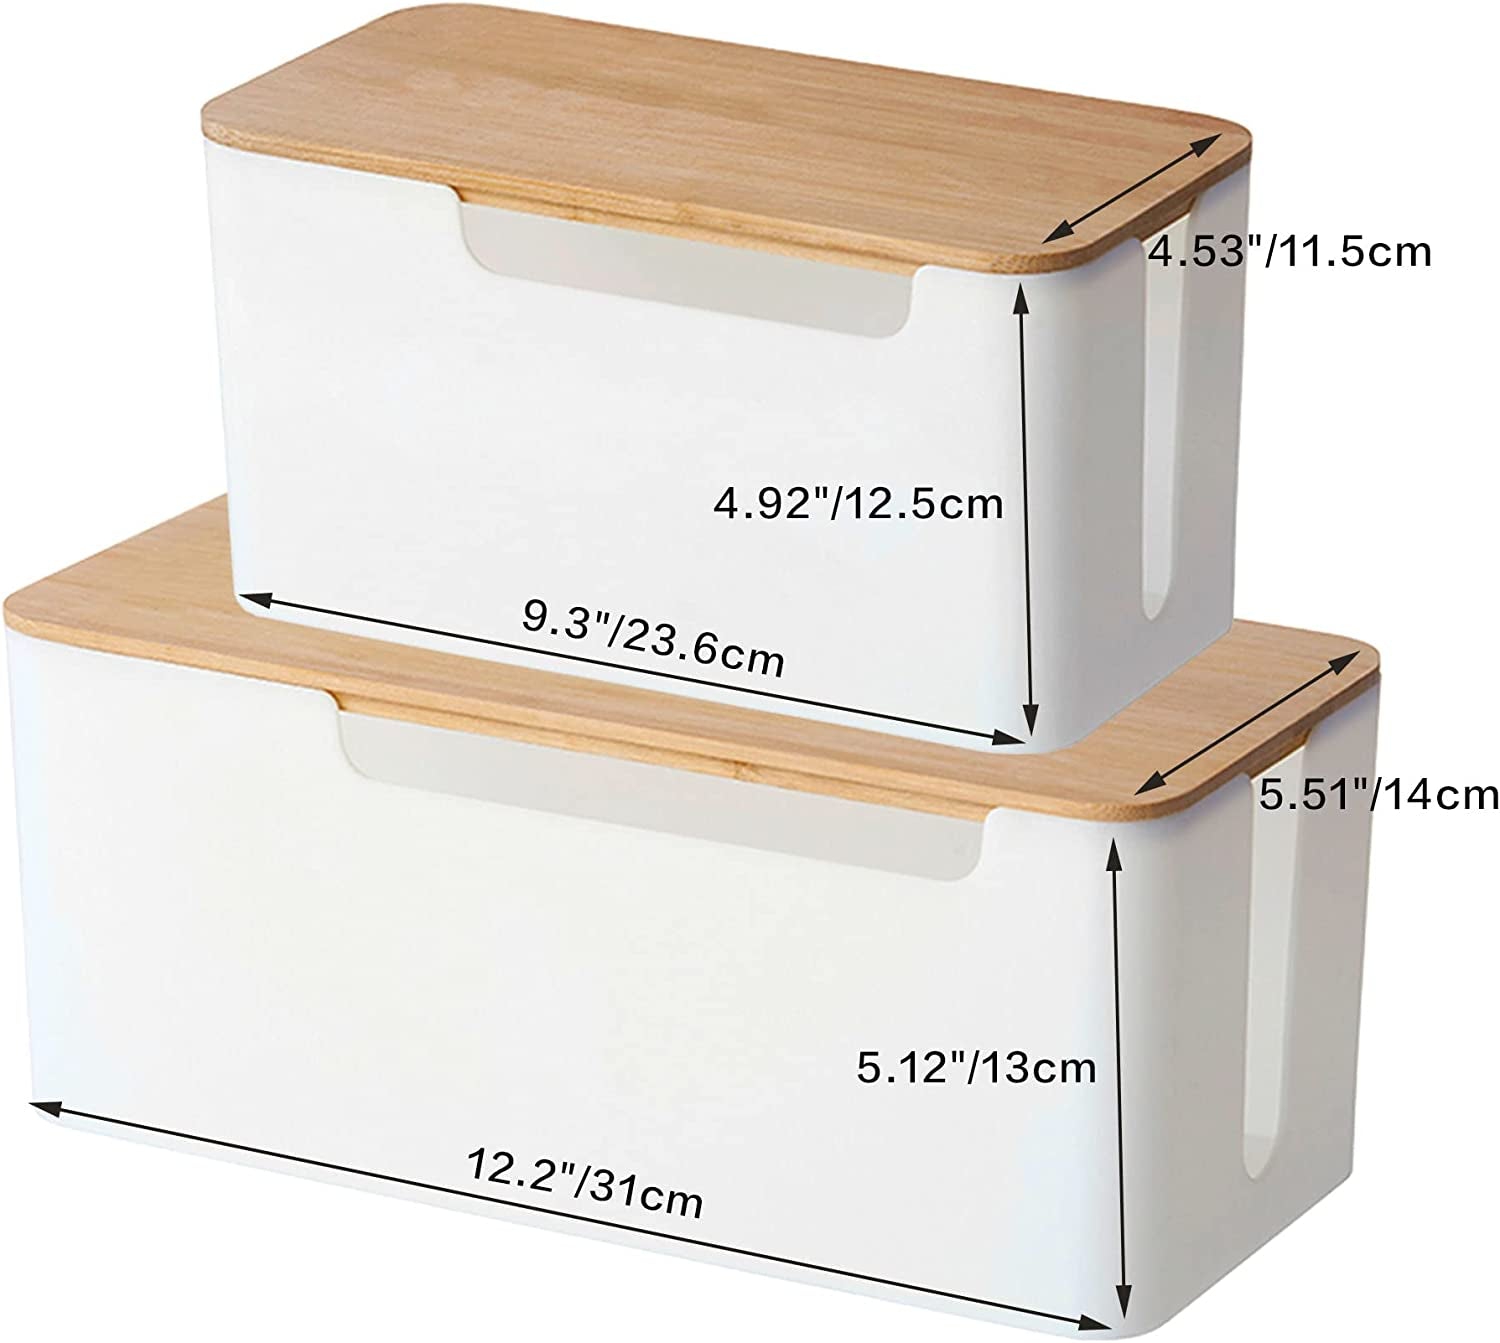 secretgreen.com.au, [Set of 2] Wood Cover Cable Management Box Set, Wire Ties Included to Organize Desk Cord Cables, Hide TV Computer Wires, Power Strips, USB Hub to Make Your Home, Office Neat and Clean (White)